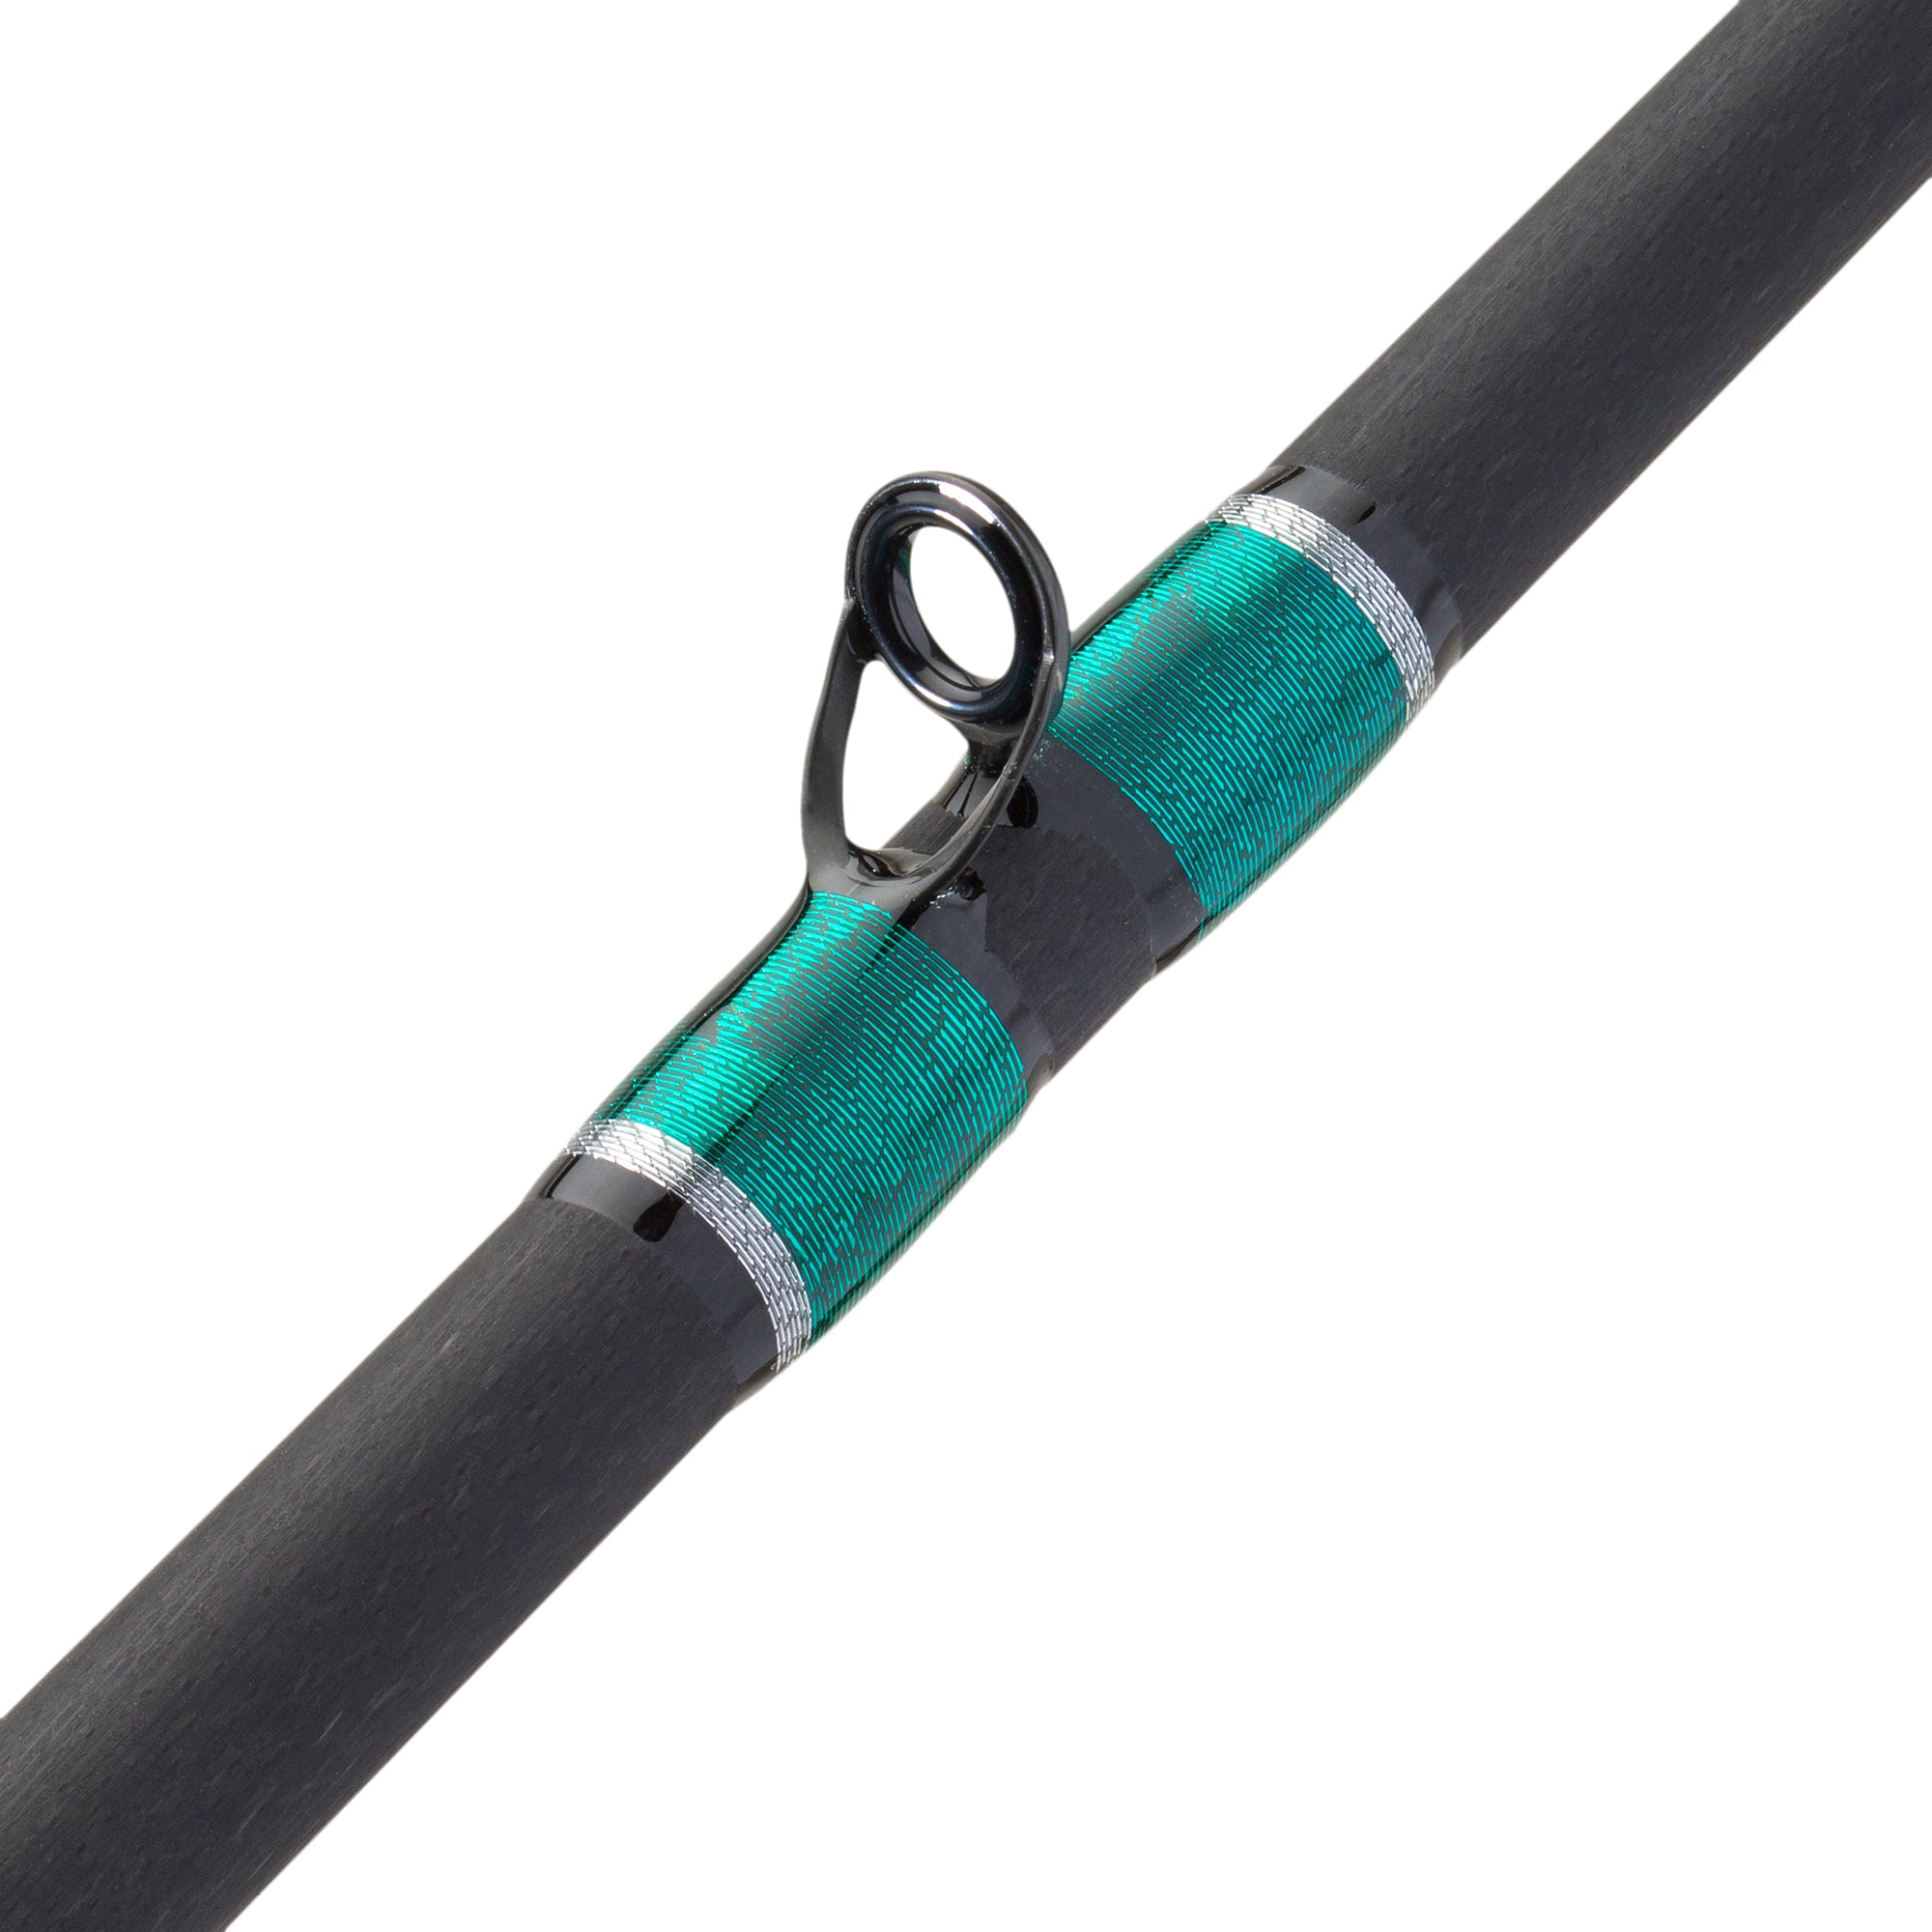 Electrical Fishing Rods  Rods & Electricalable Rods